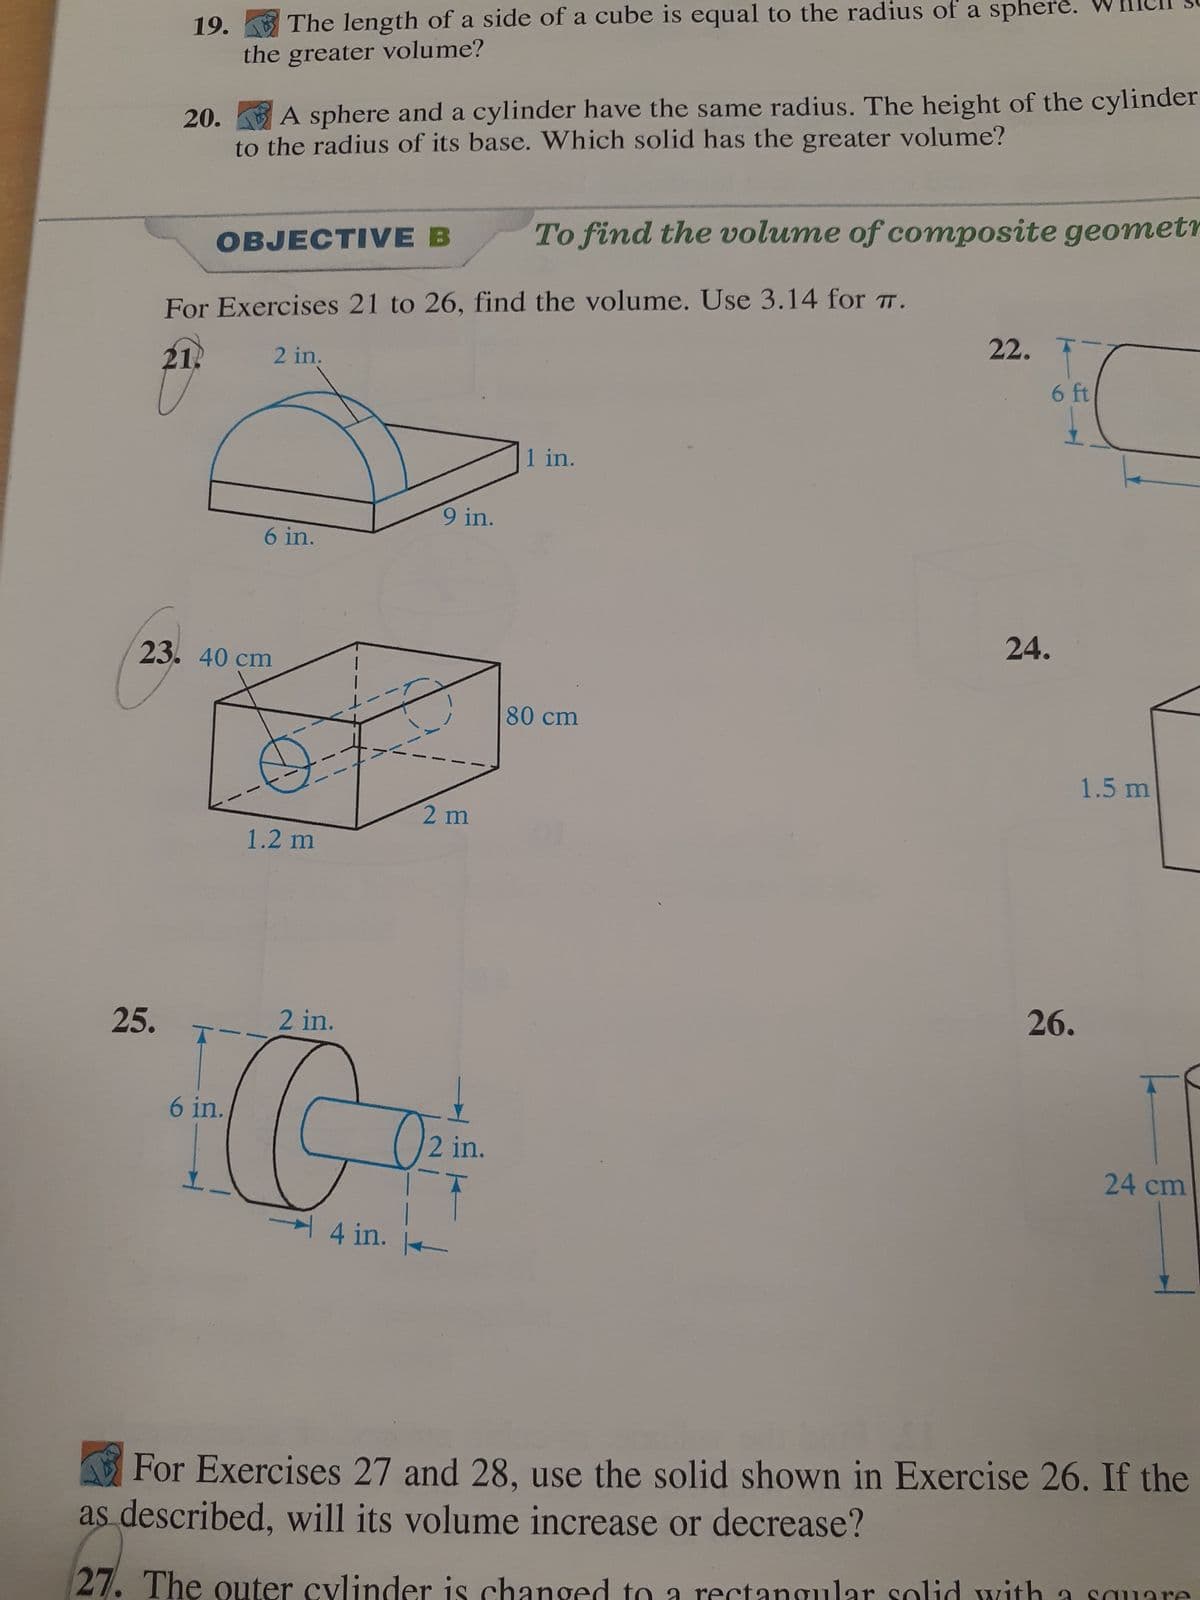 19.
25.
The length of a side of a cube is equal to the radius of a sphere.
the greater volume?
20.
A sphere and a cylinder have the same radius. The height of the cylinder
to the radius of its base. Which solid has the greater volume?
OBJECTIVE B
For Exercises 21 to 26, find the volume. Use 3.14 for T.
21.
6 in.
2 in.
23. 40 cm
6 in.
1.2 m
2 in.
G
4 in.
9 in.
2 m
2 in.
K
To find the volume of composite geometr
1 in.
80 cm
22.
ctangula
24.
6 ft
26.
id with
1.5 m
For Exercises 27 and 28, use the solid shown in Exercise 26. If the
as described, will its volume increase or decrease?
27. The outer cylinder hanged
24 cm